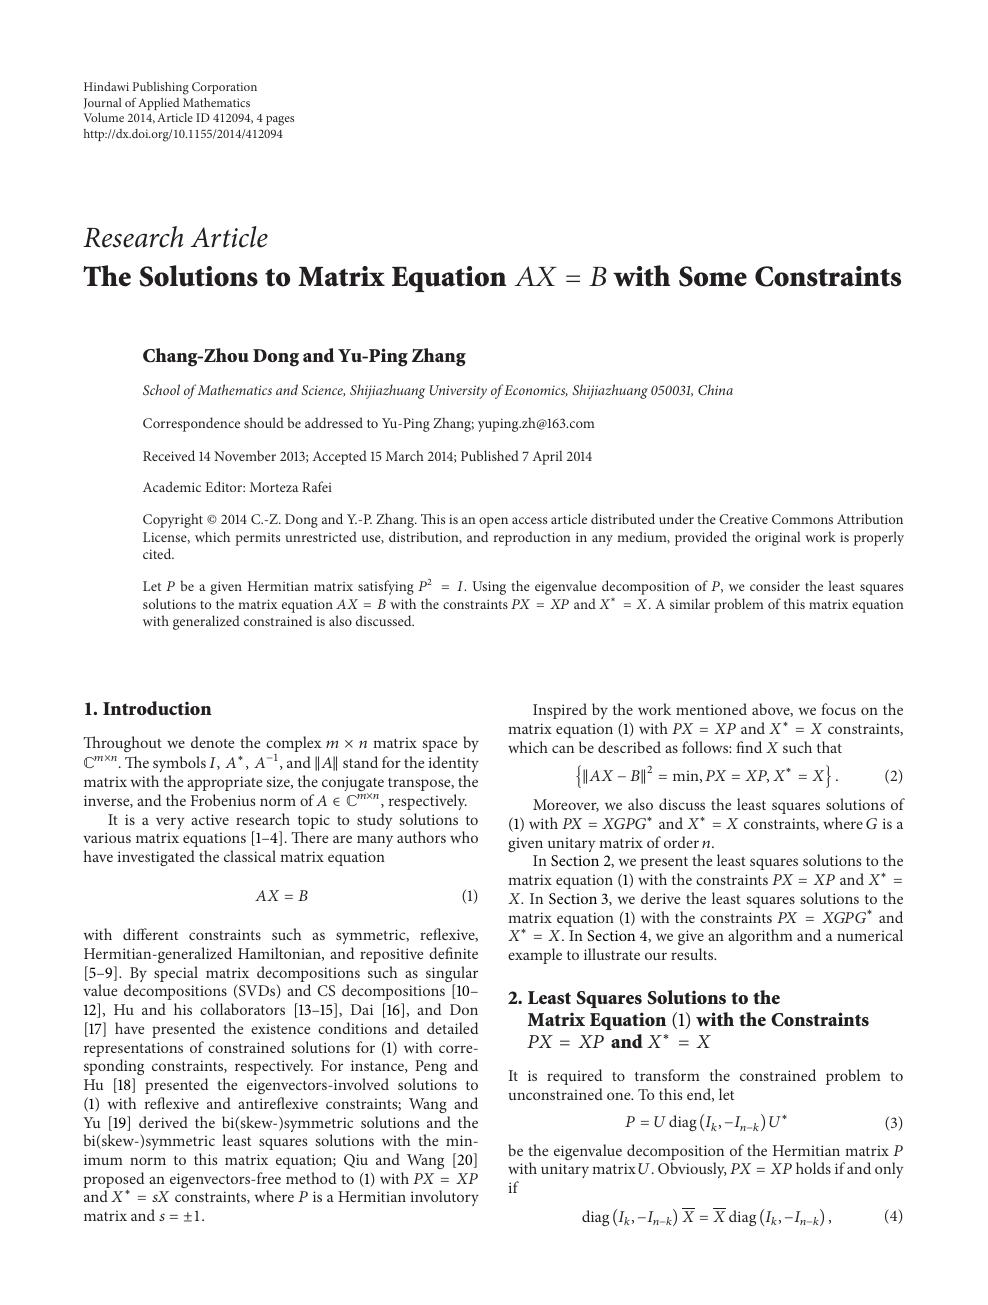 The Solutions To Matrix Equation With Some Constraints Topic Of Research Paper In Mathematics Download Scholarly Article Pdf And Read For Free On Cyberleninka Open Science Hub